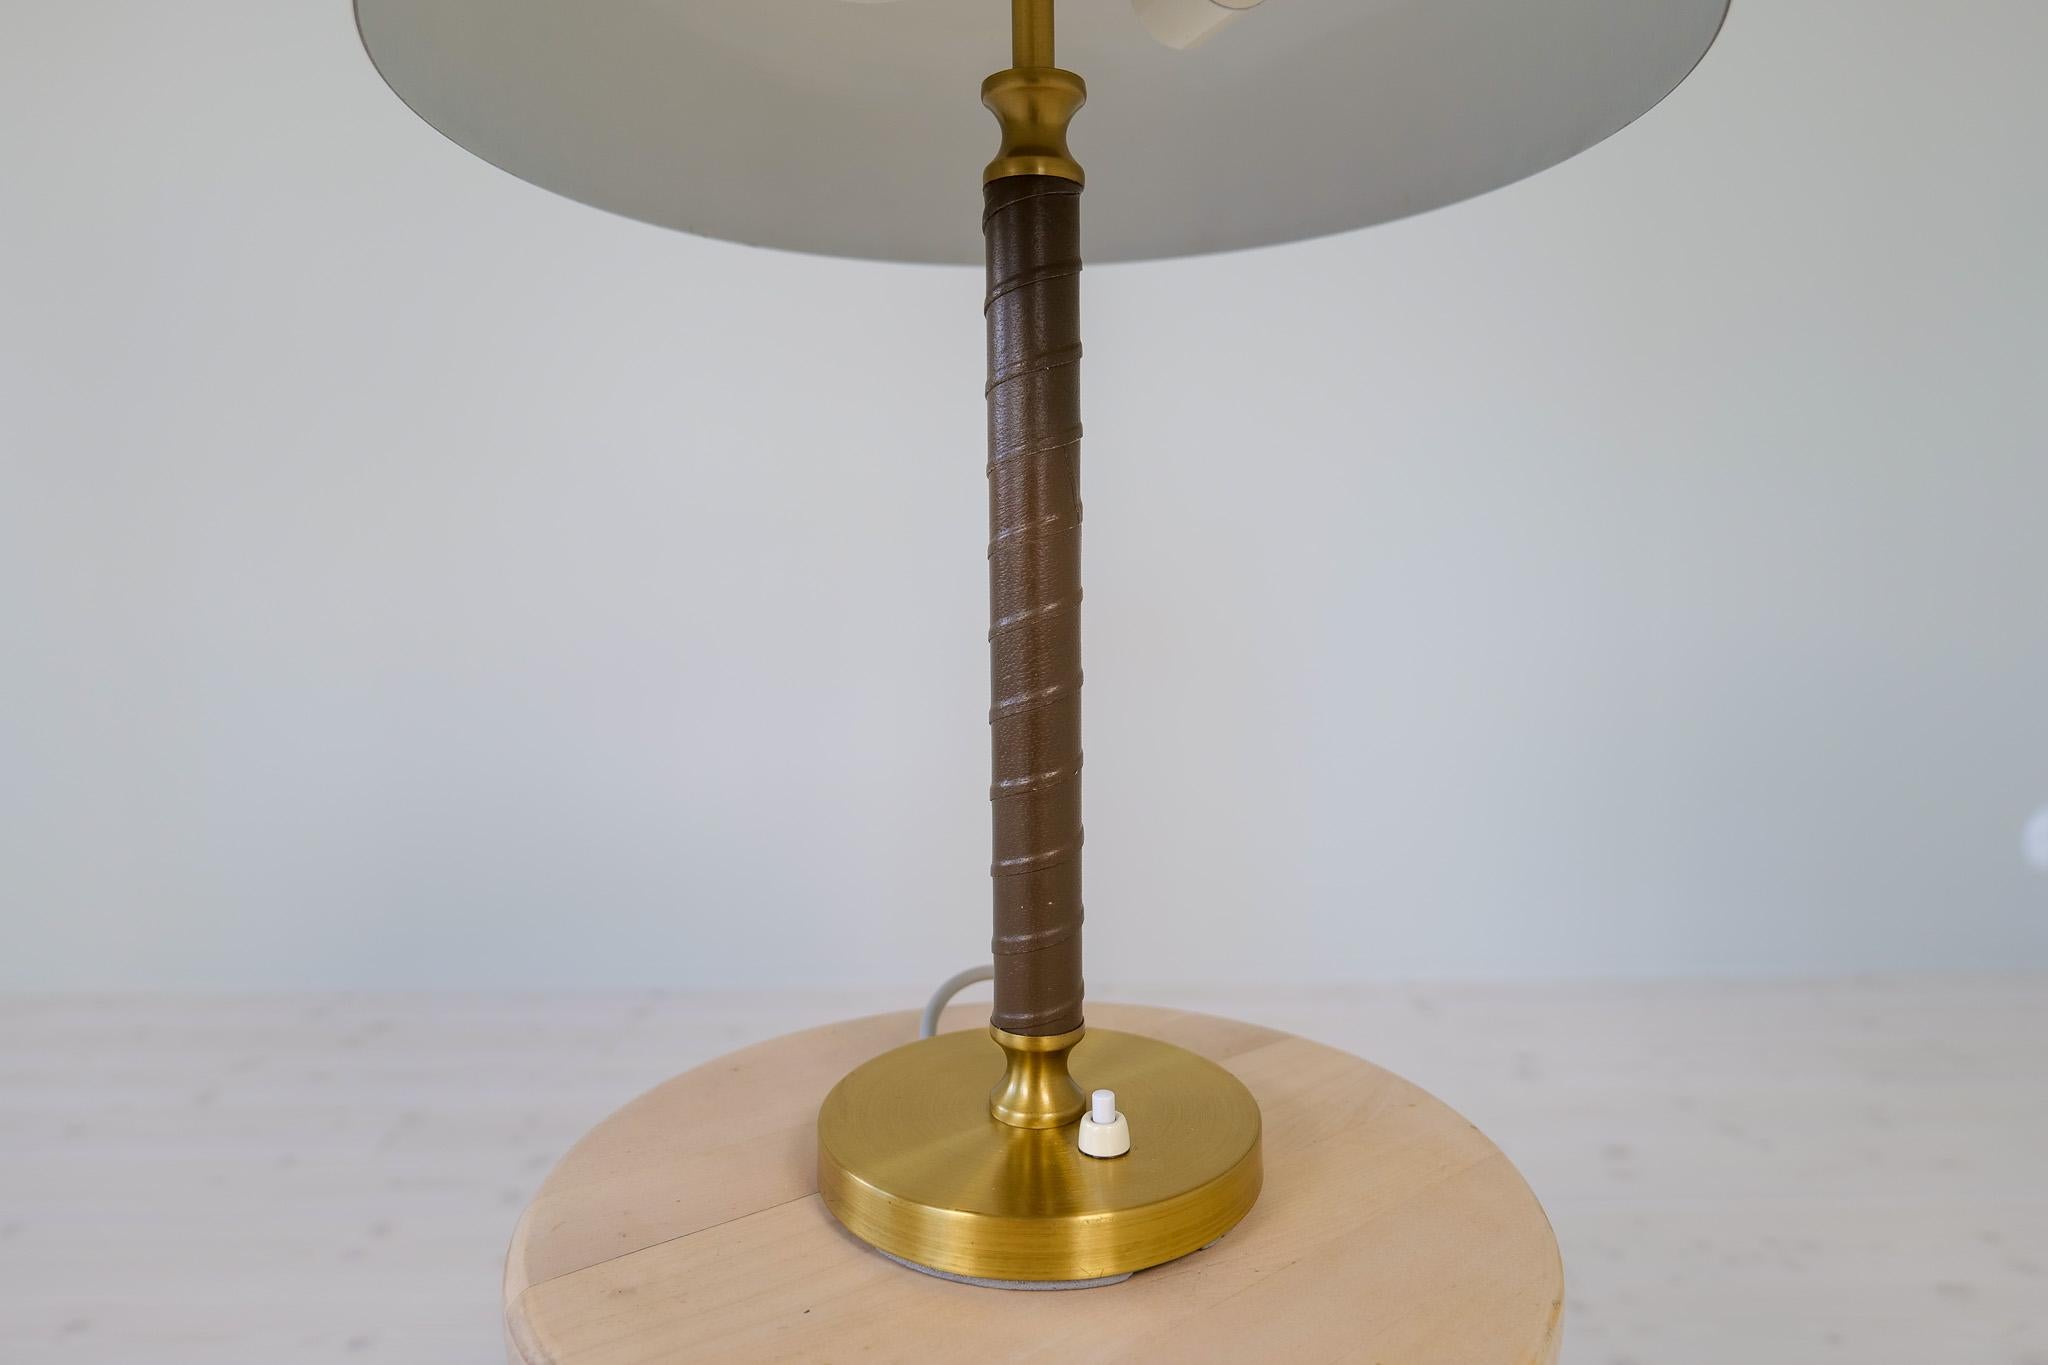 Midcentury Modern Table Lamp in Brass and Leather by Boréns, Sweden, 1960s For Sale 1